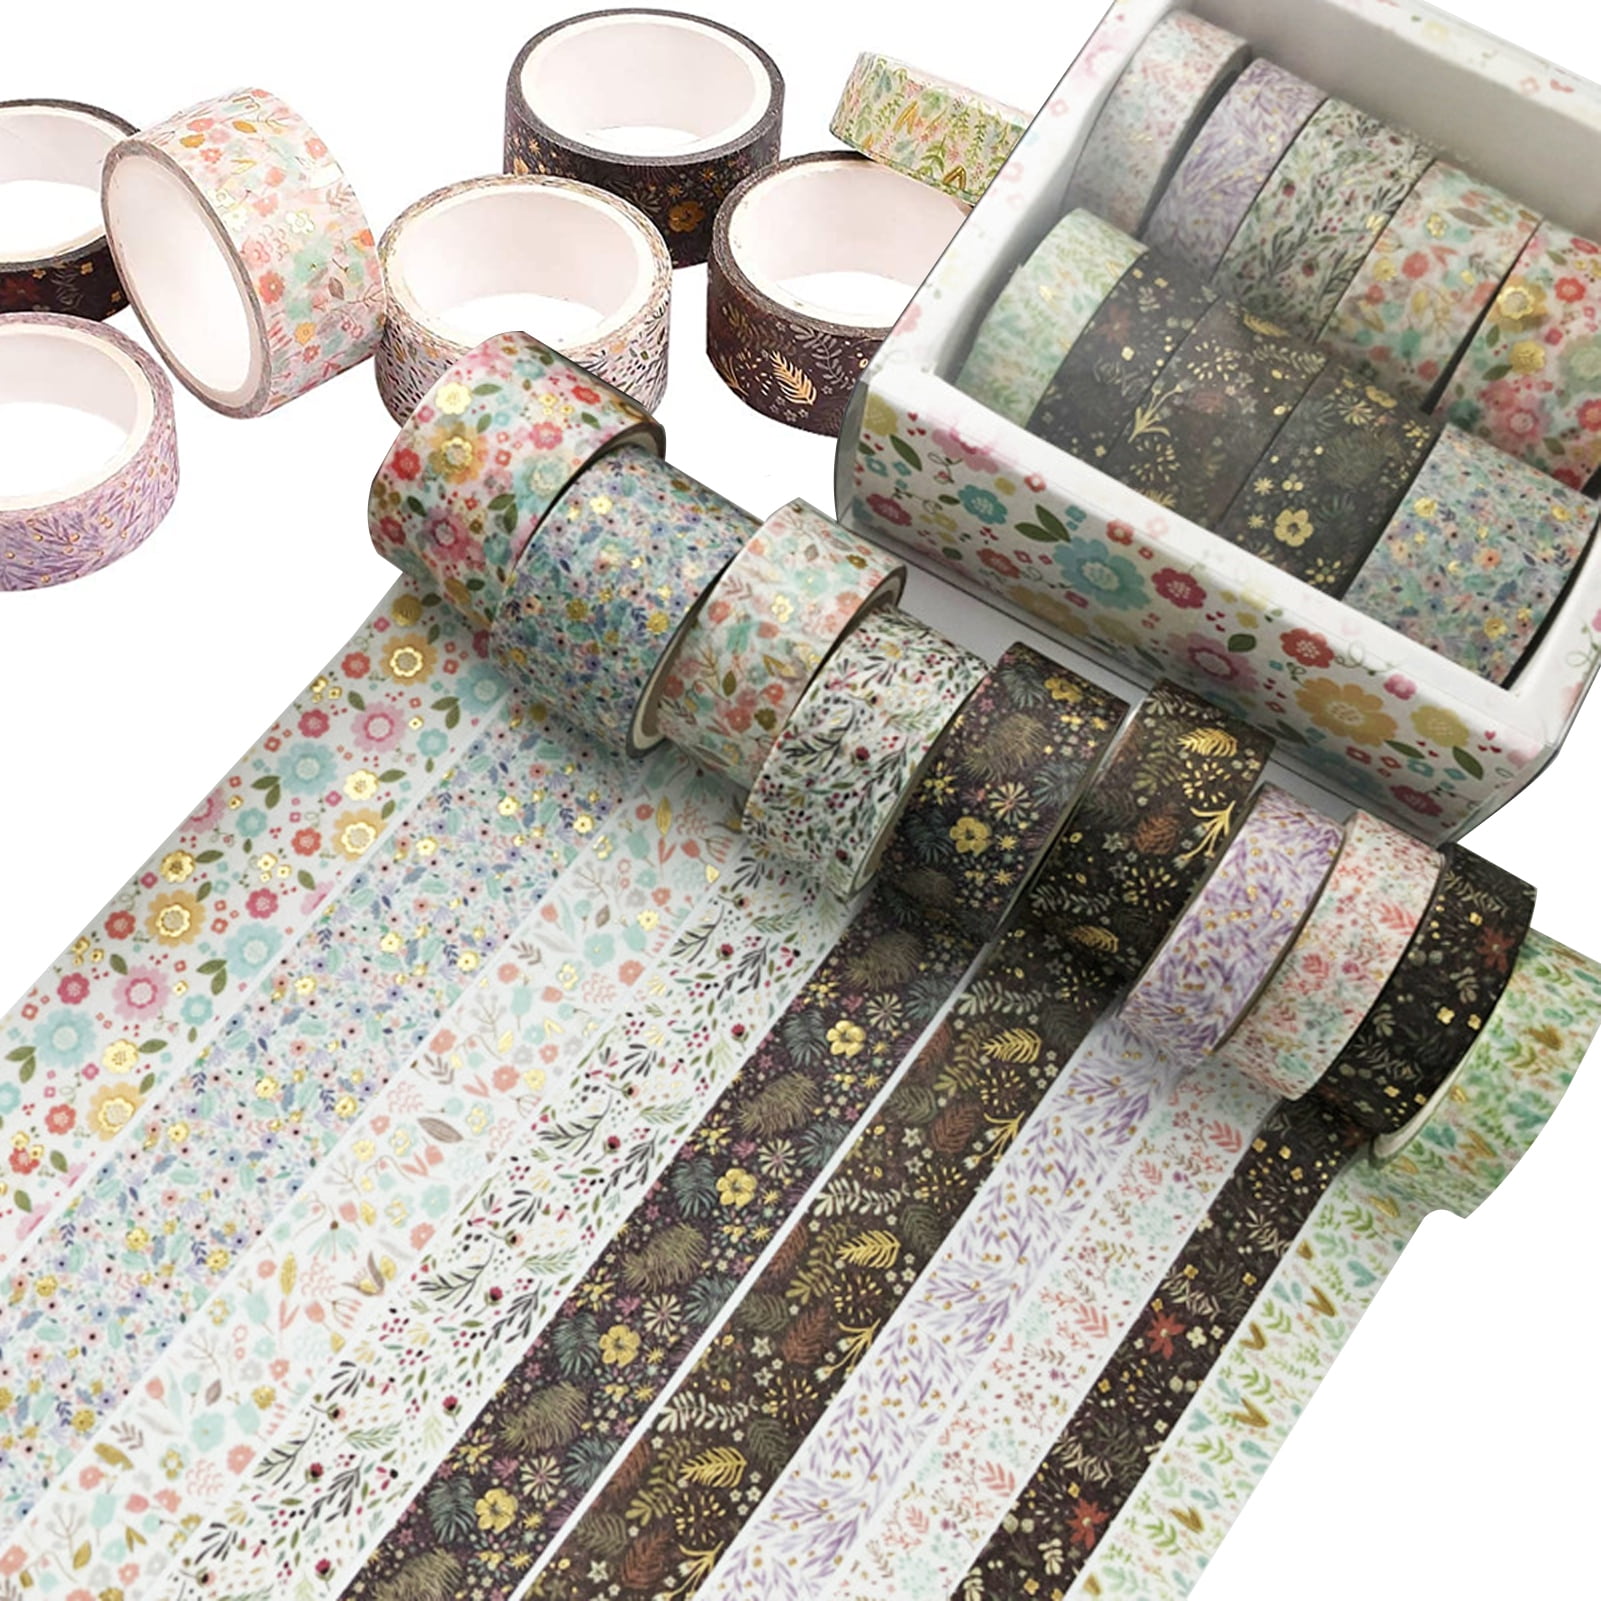 Green Decorative Masking Adhesive Tape Stickers Set with Exquisite Box for Traveler Notebook Journal Scrapbook Crafting Photo Album Washi Tape